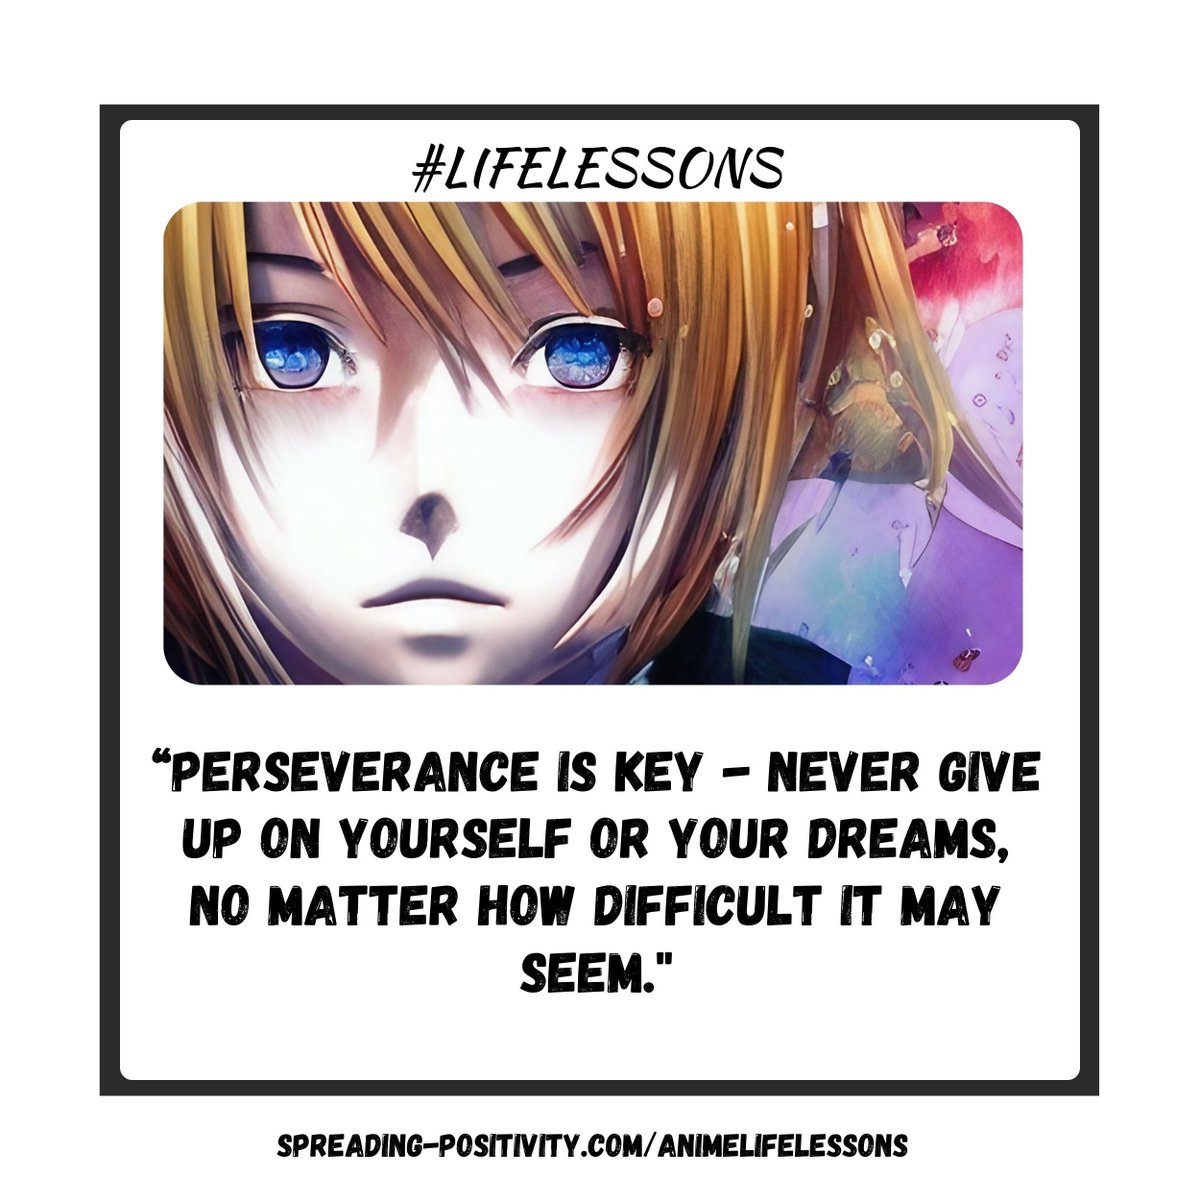 Our anime-inspired custom design reminds us that perseverance is the key to success.  🌟💪spreading-positivity.com/animelifelesso… 

#personaldevelopment #animesaying #animeinspired #selfimprovement #positivity #inclusivity #embracediversity #grittiness #callsforaction #mentalwellness